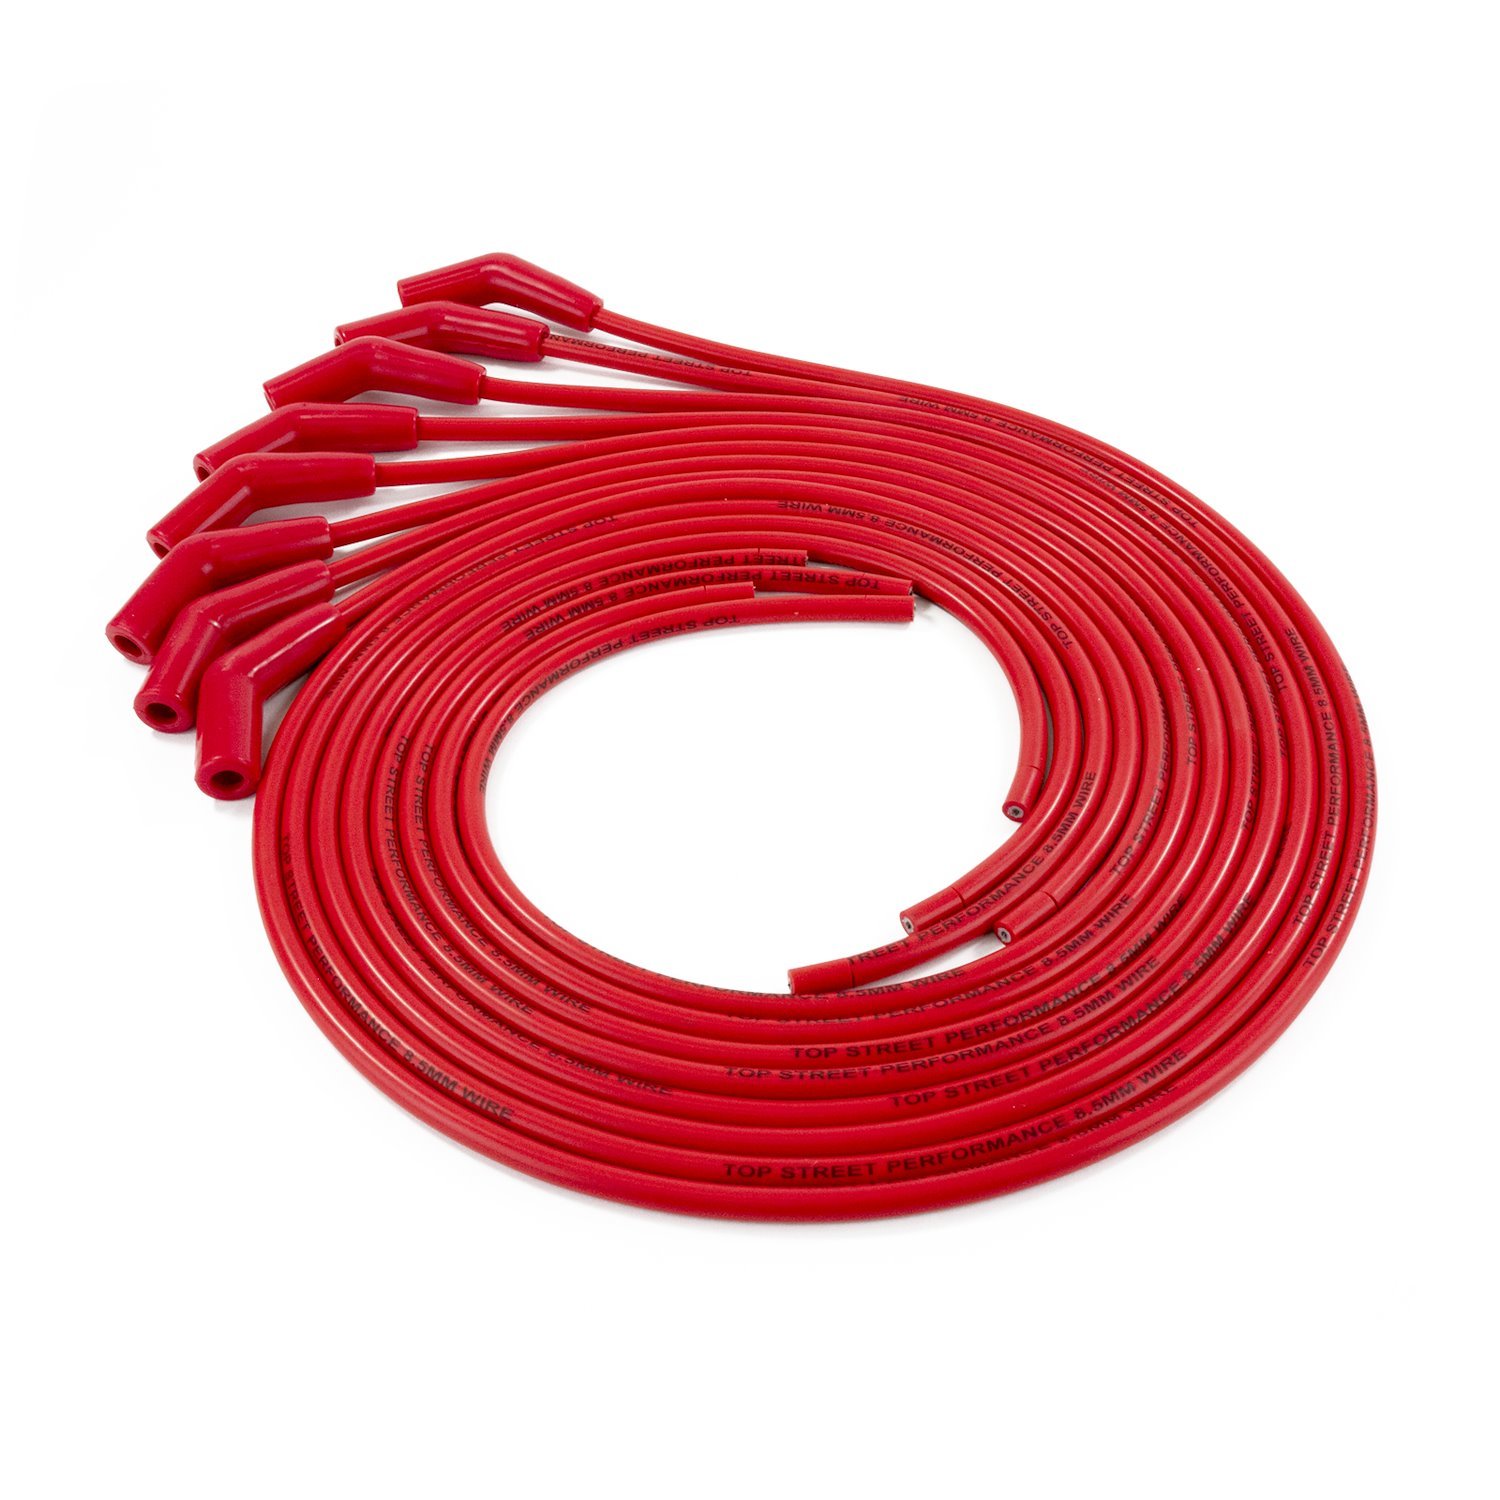 85235 Universal Ignition Wires, 8.5mm Red, 135 Deg. Plug Boots